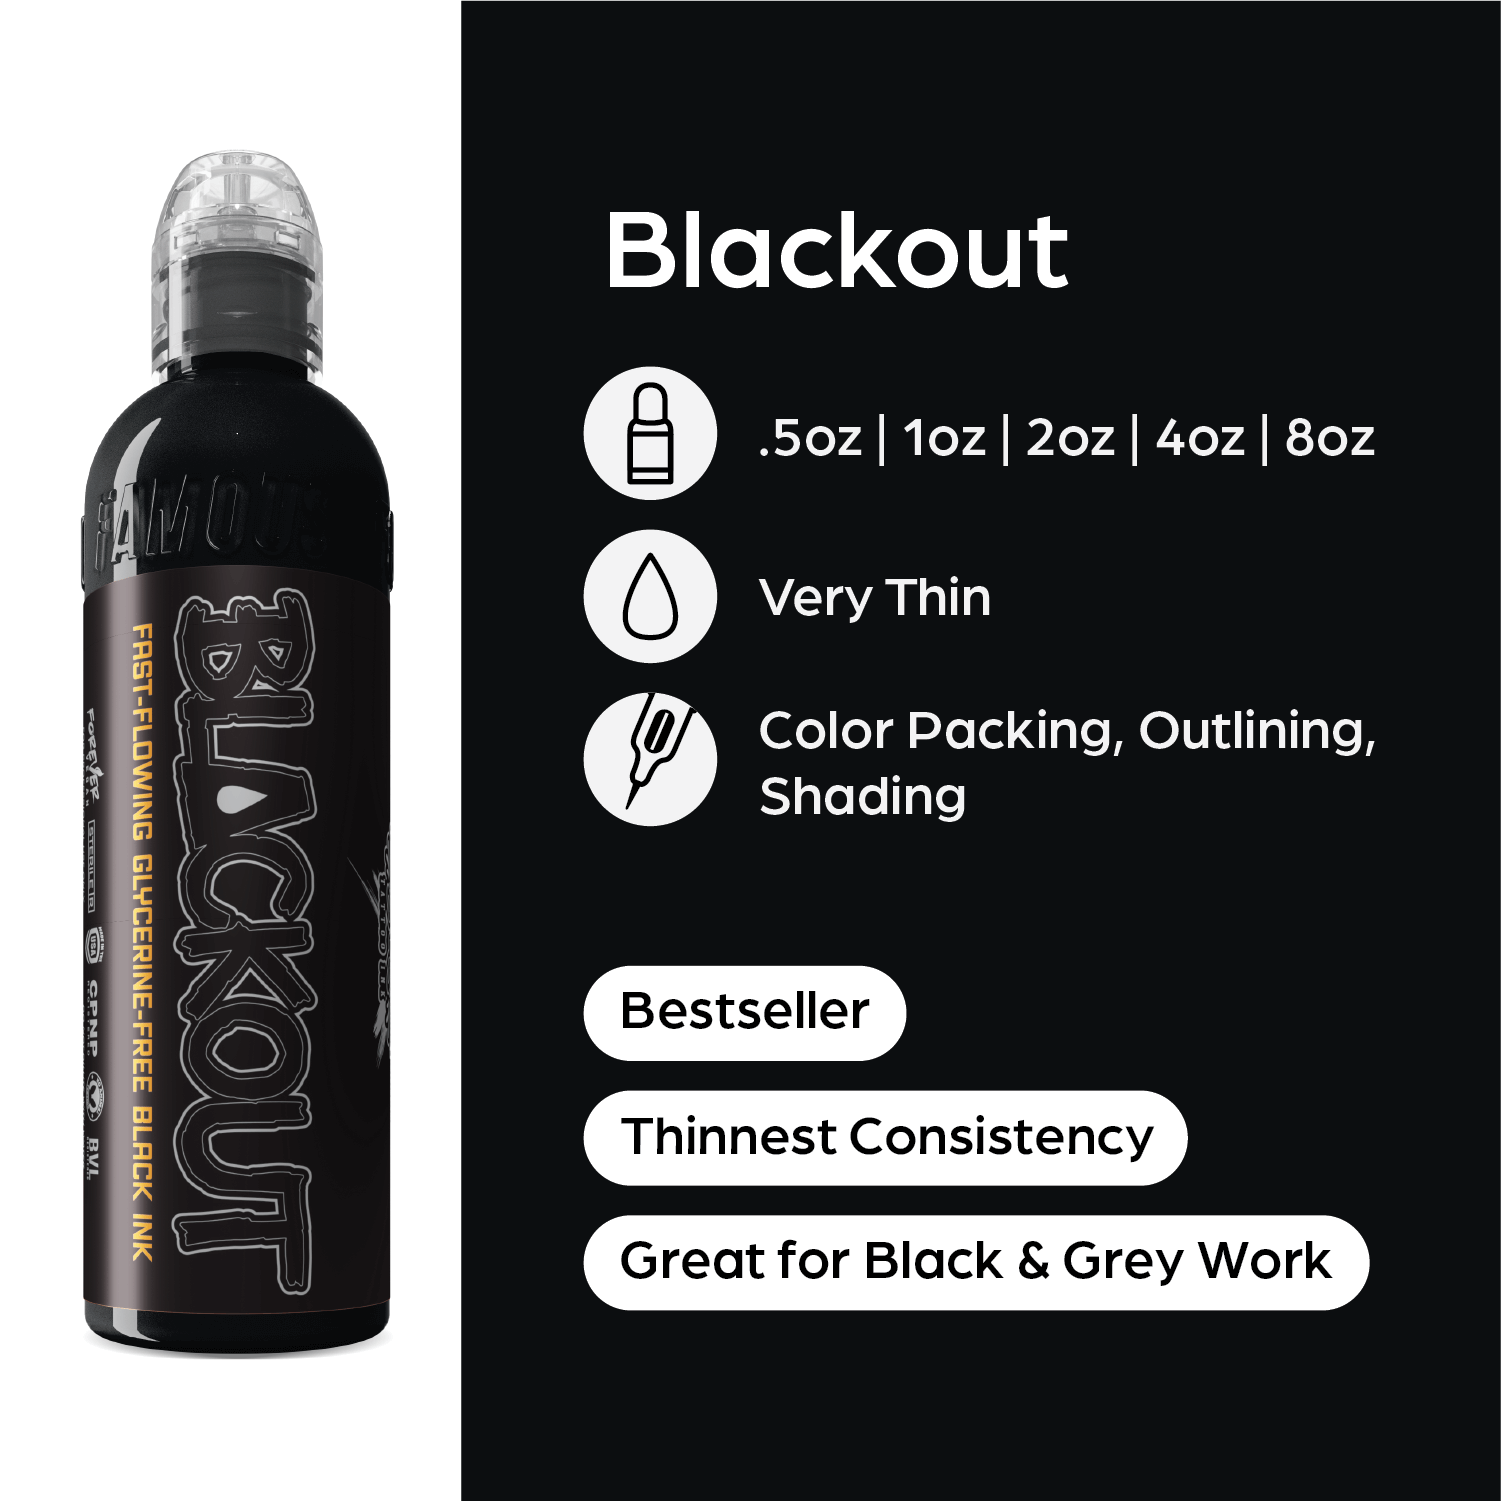 Blackout | World Famous Tattoo Ink